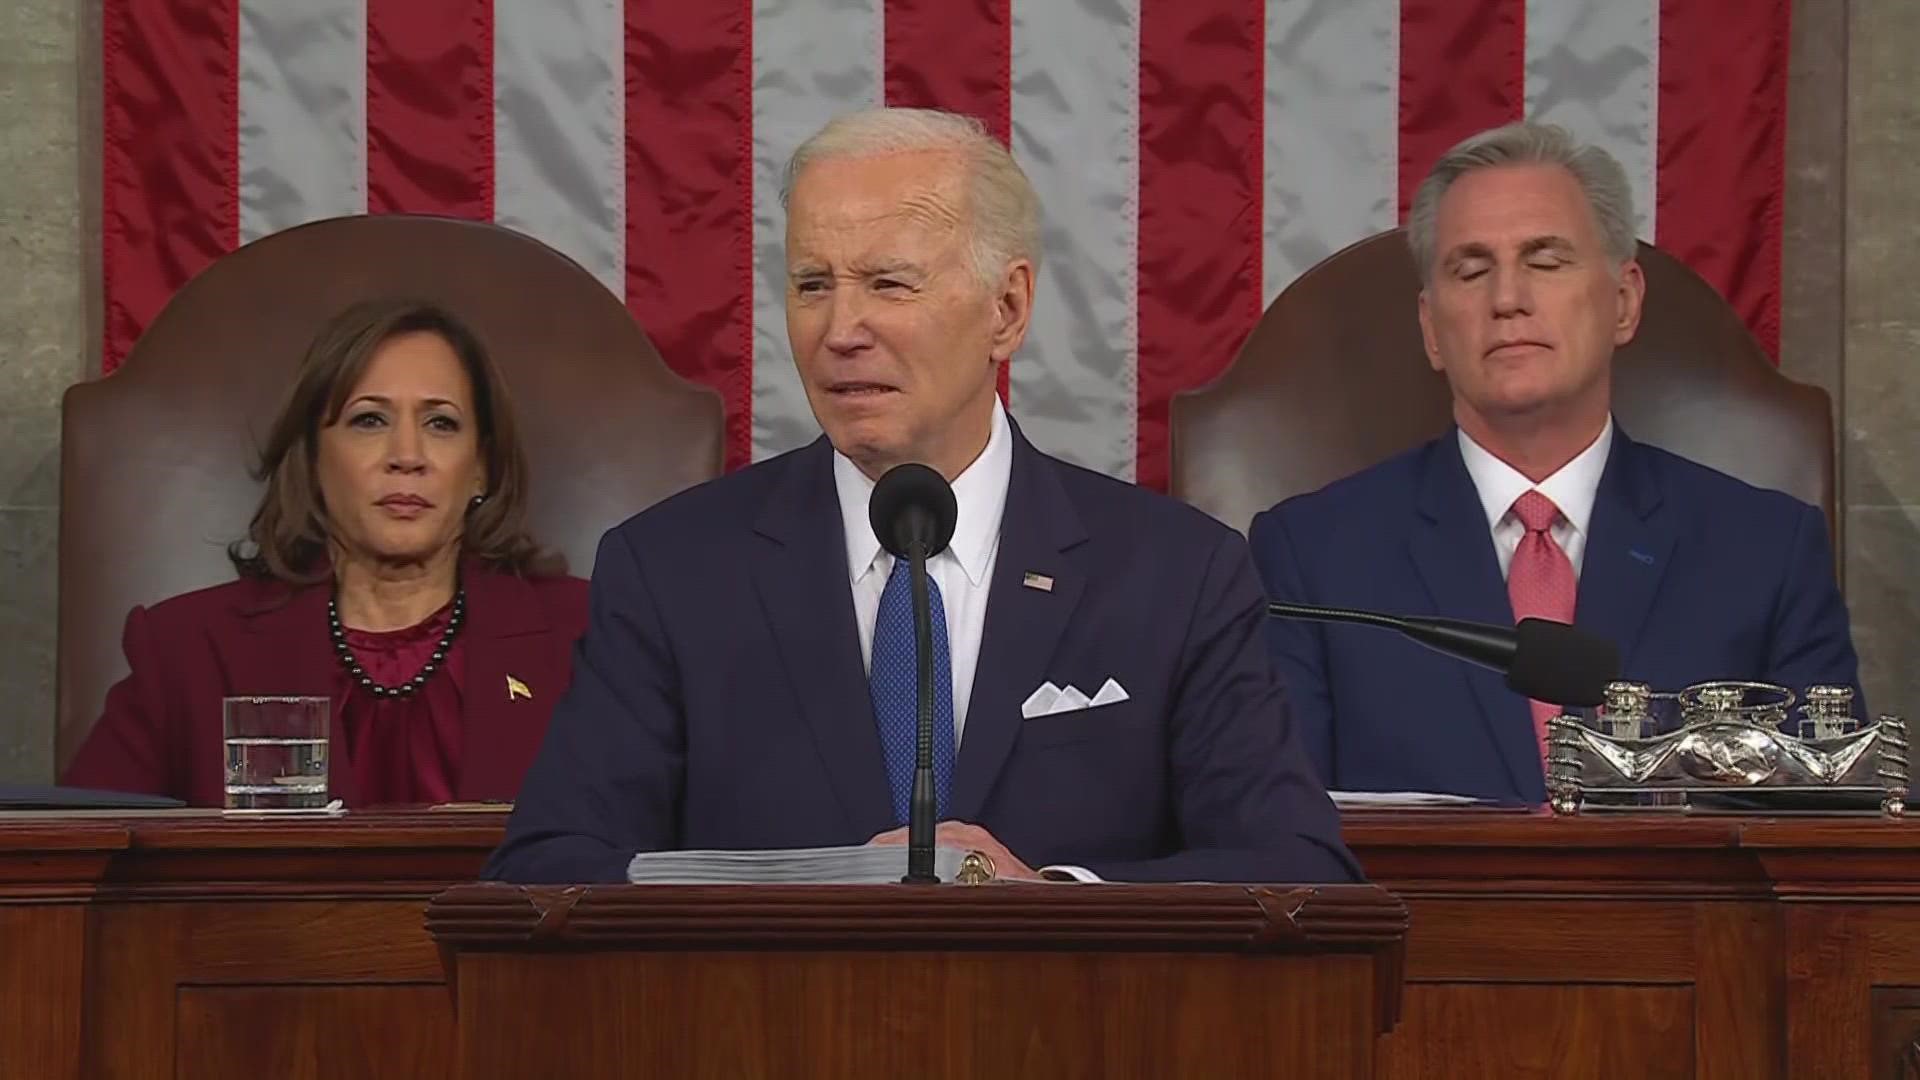 President Biden exhorted Republicans in his State of the Union address to work with him to “finish the job” of rebuilding the economy and uniting the nation.